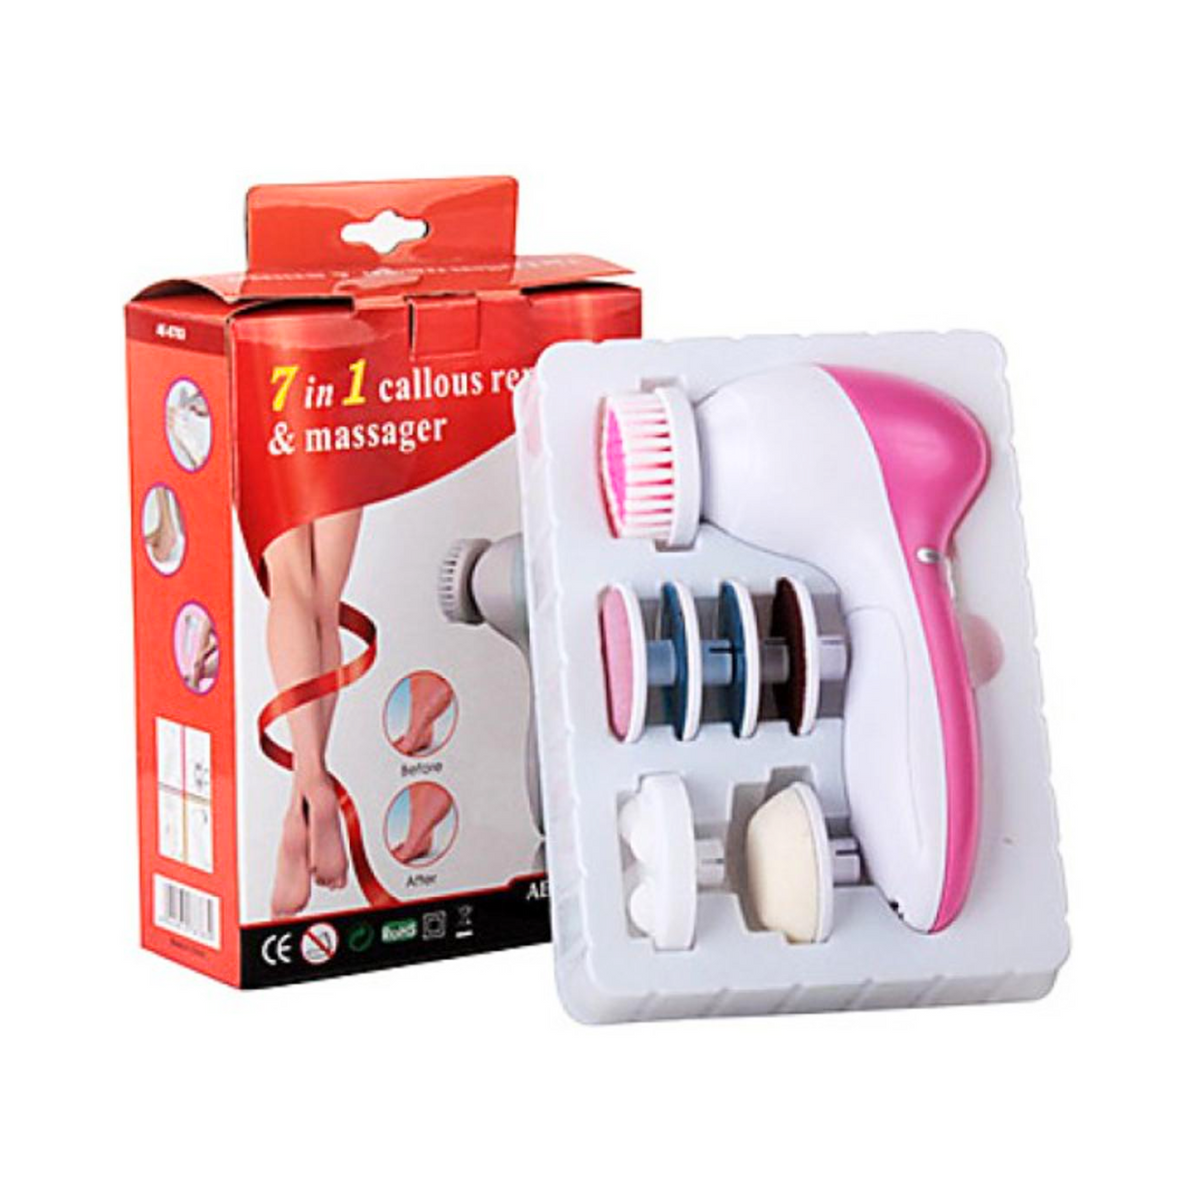 7-in-1-callus-remover-and-massager